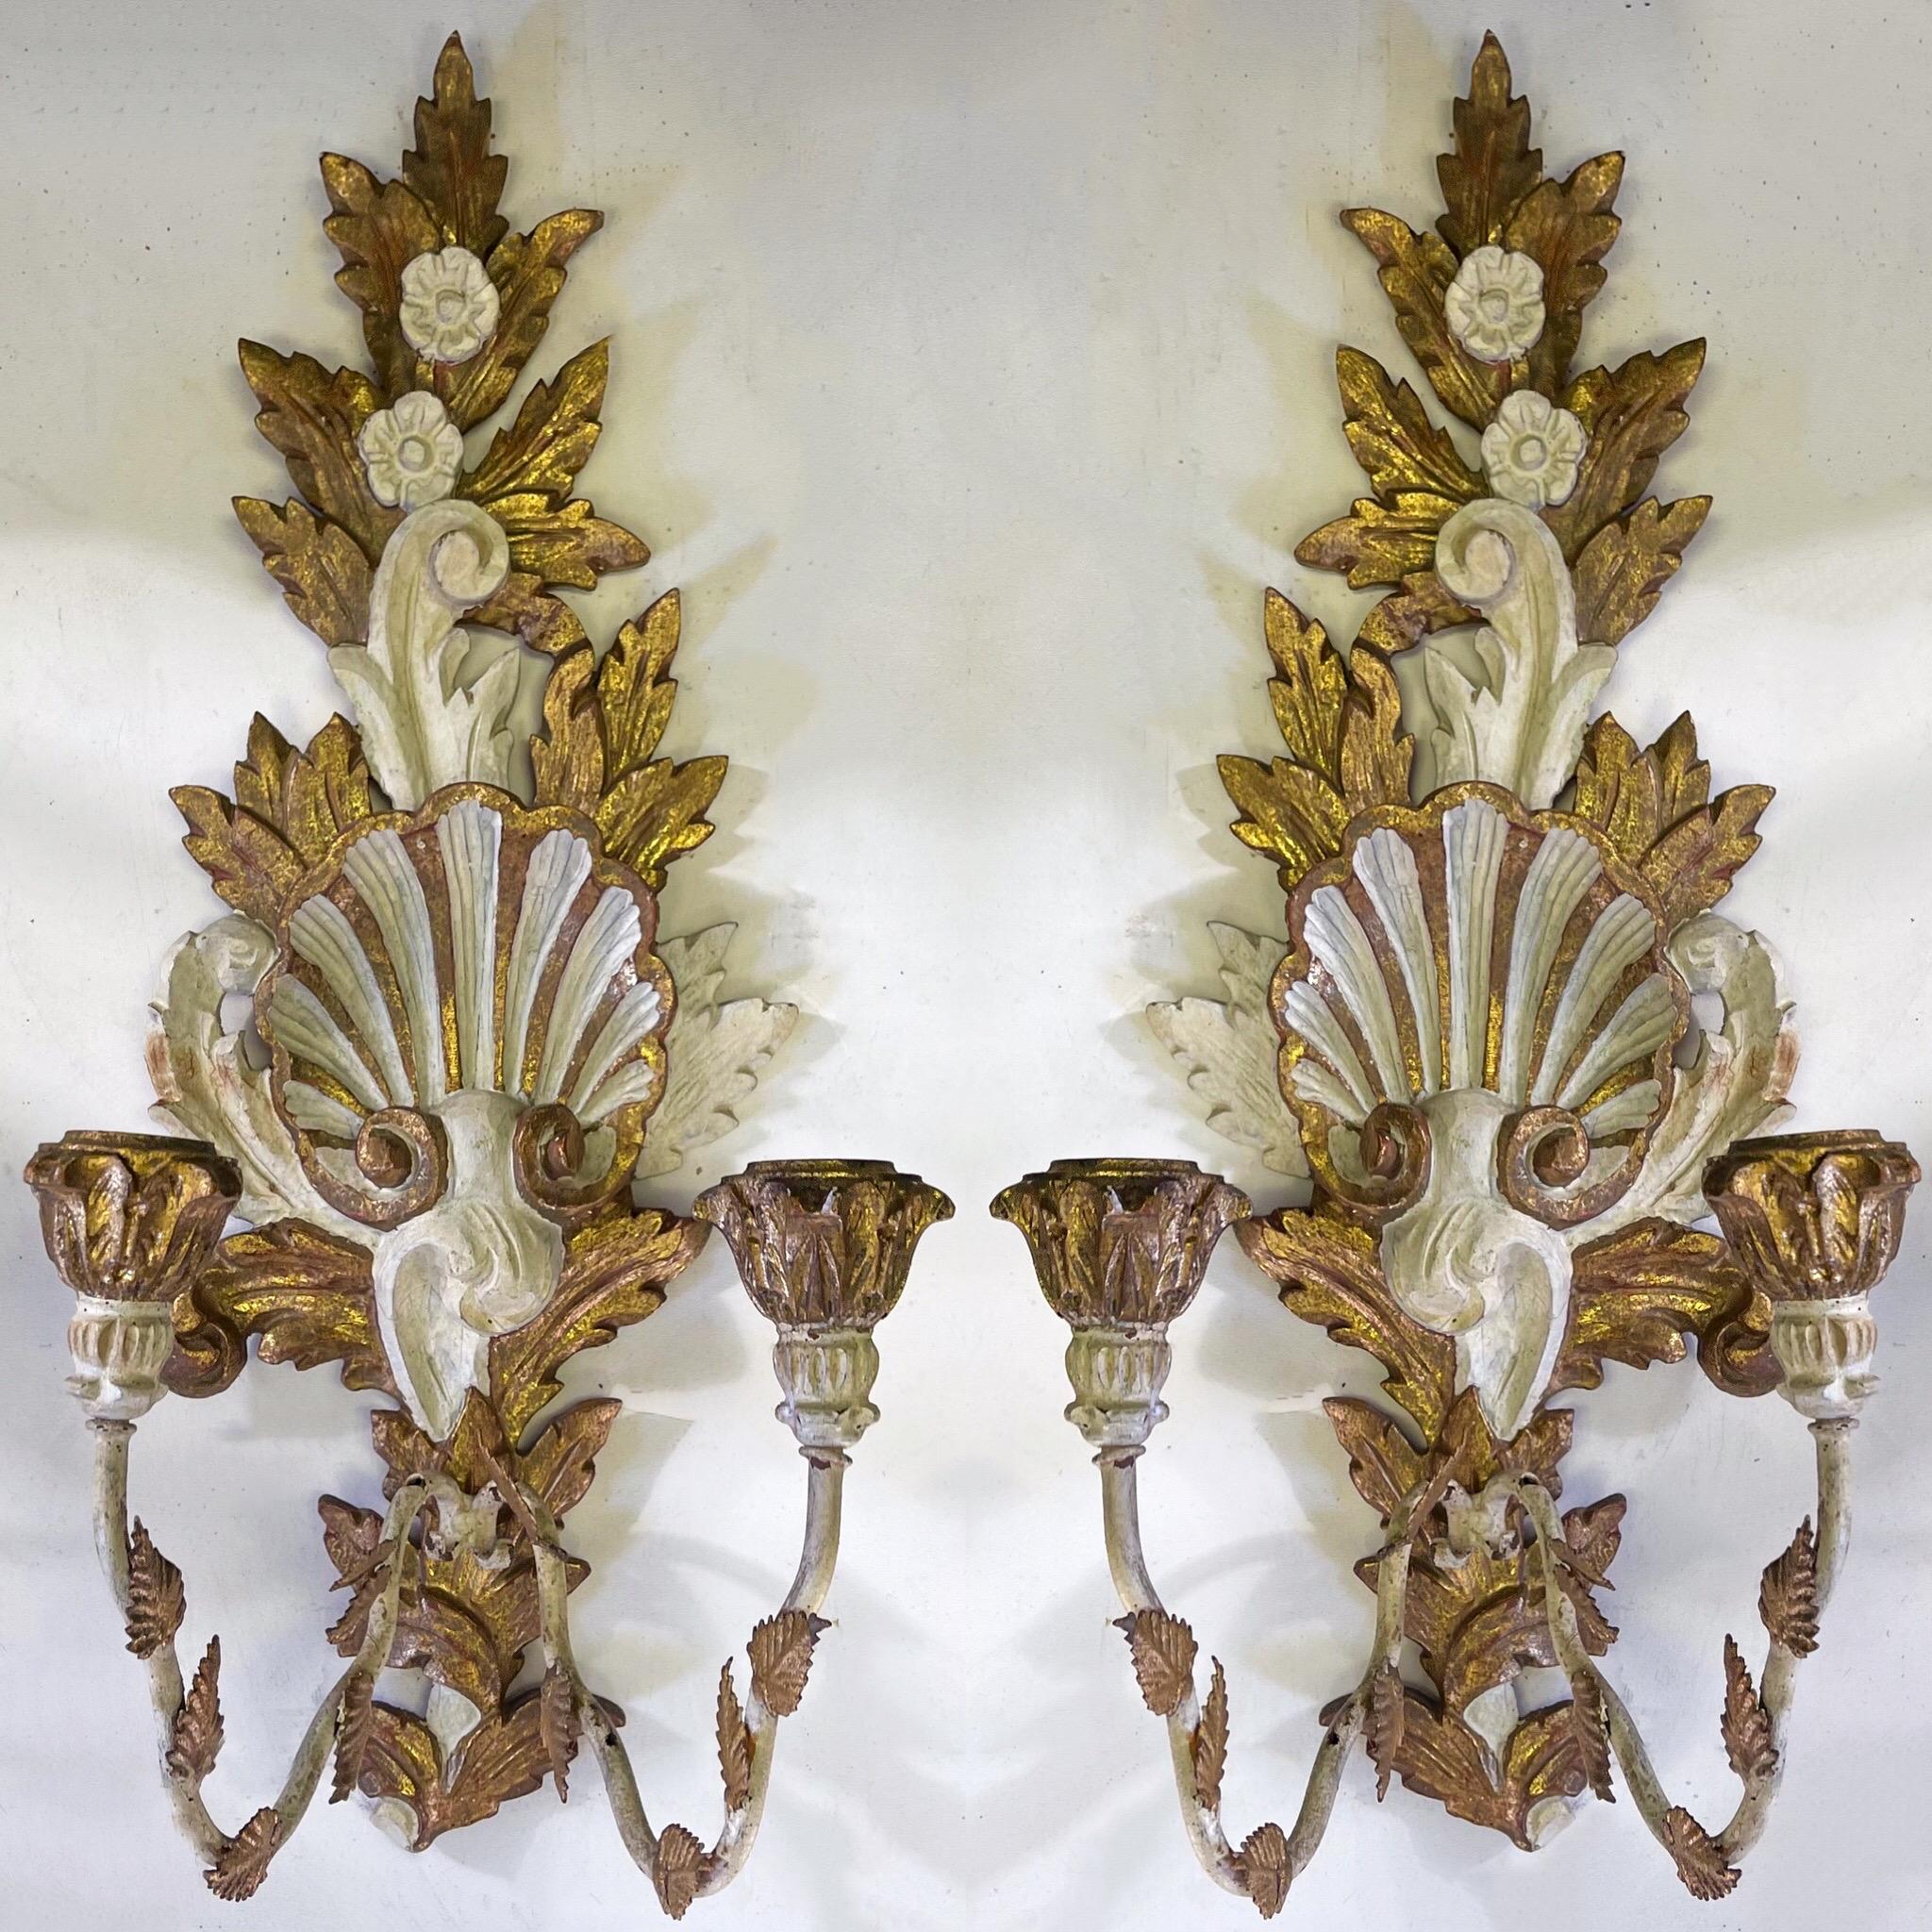 Italian Giltwood And Painted Carved Sconces With Shell And Floral Motif, Pair For Sale 2